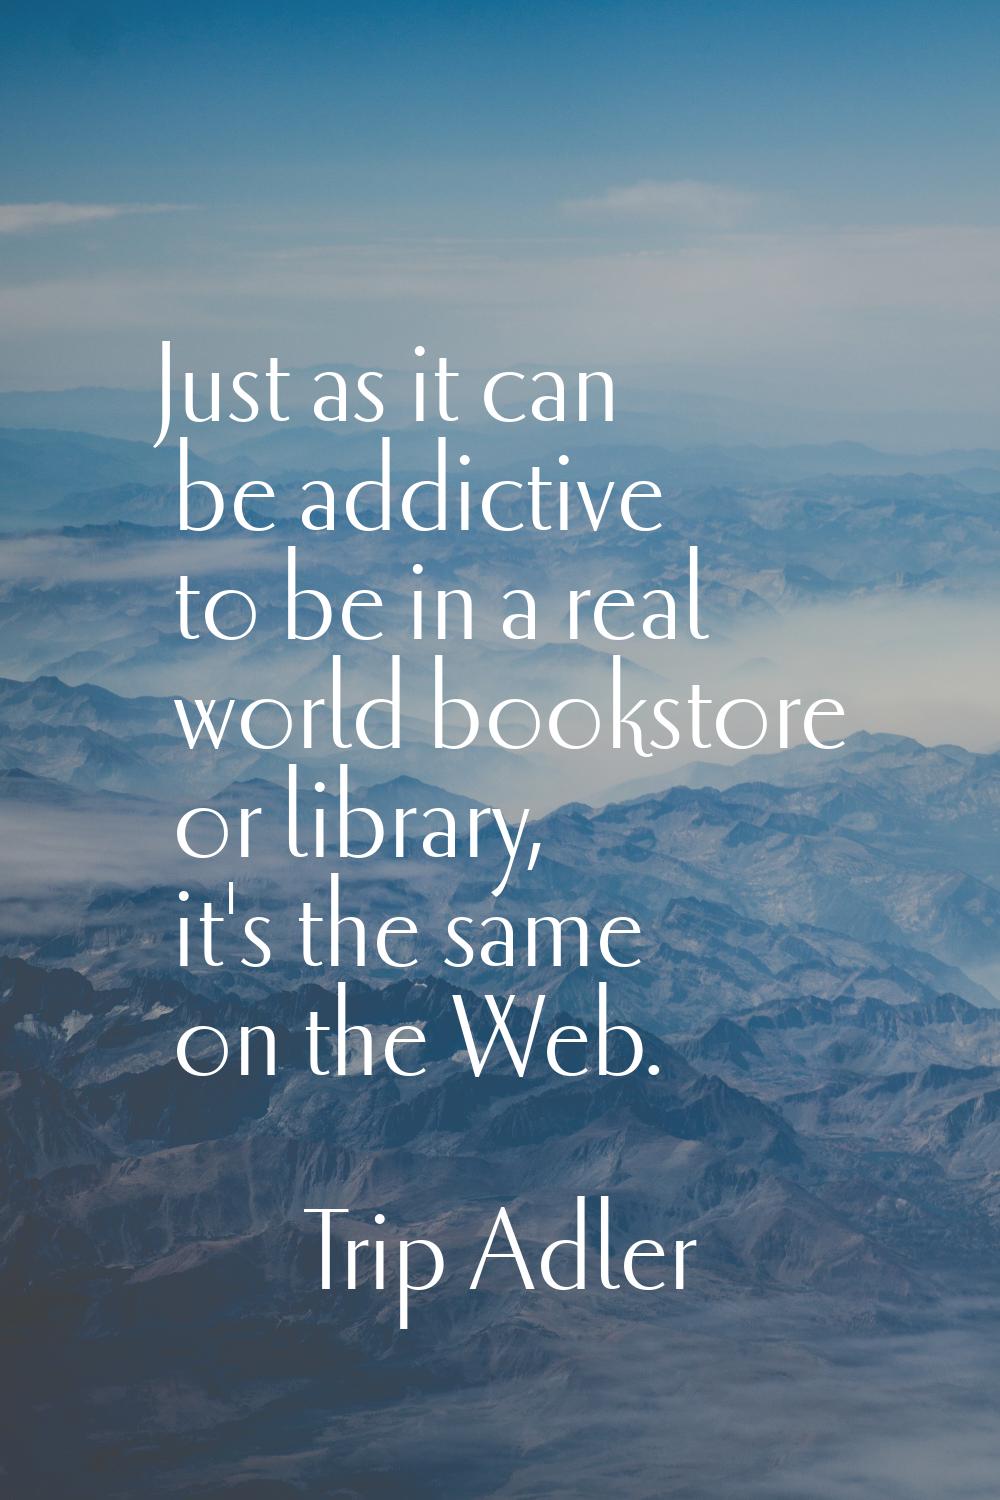 Just as it can be addictive to be in a real world bookstore or library, it's the same on the Web.